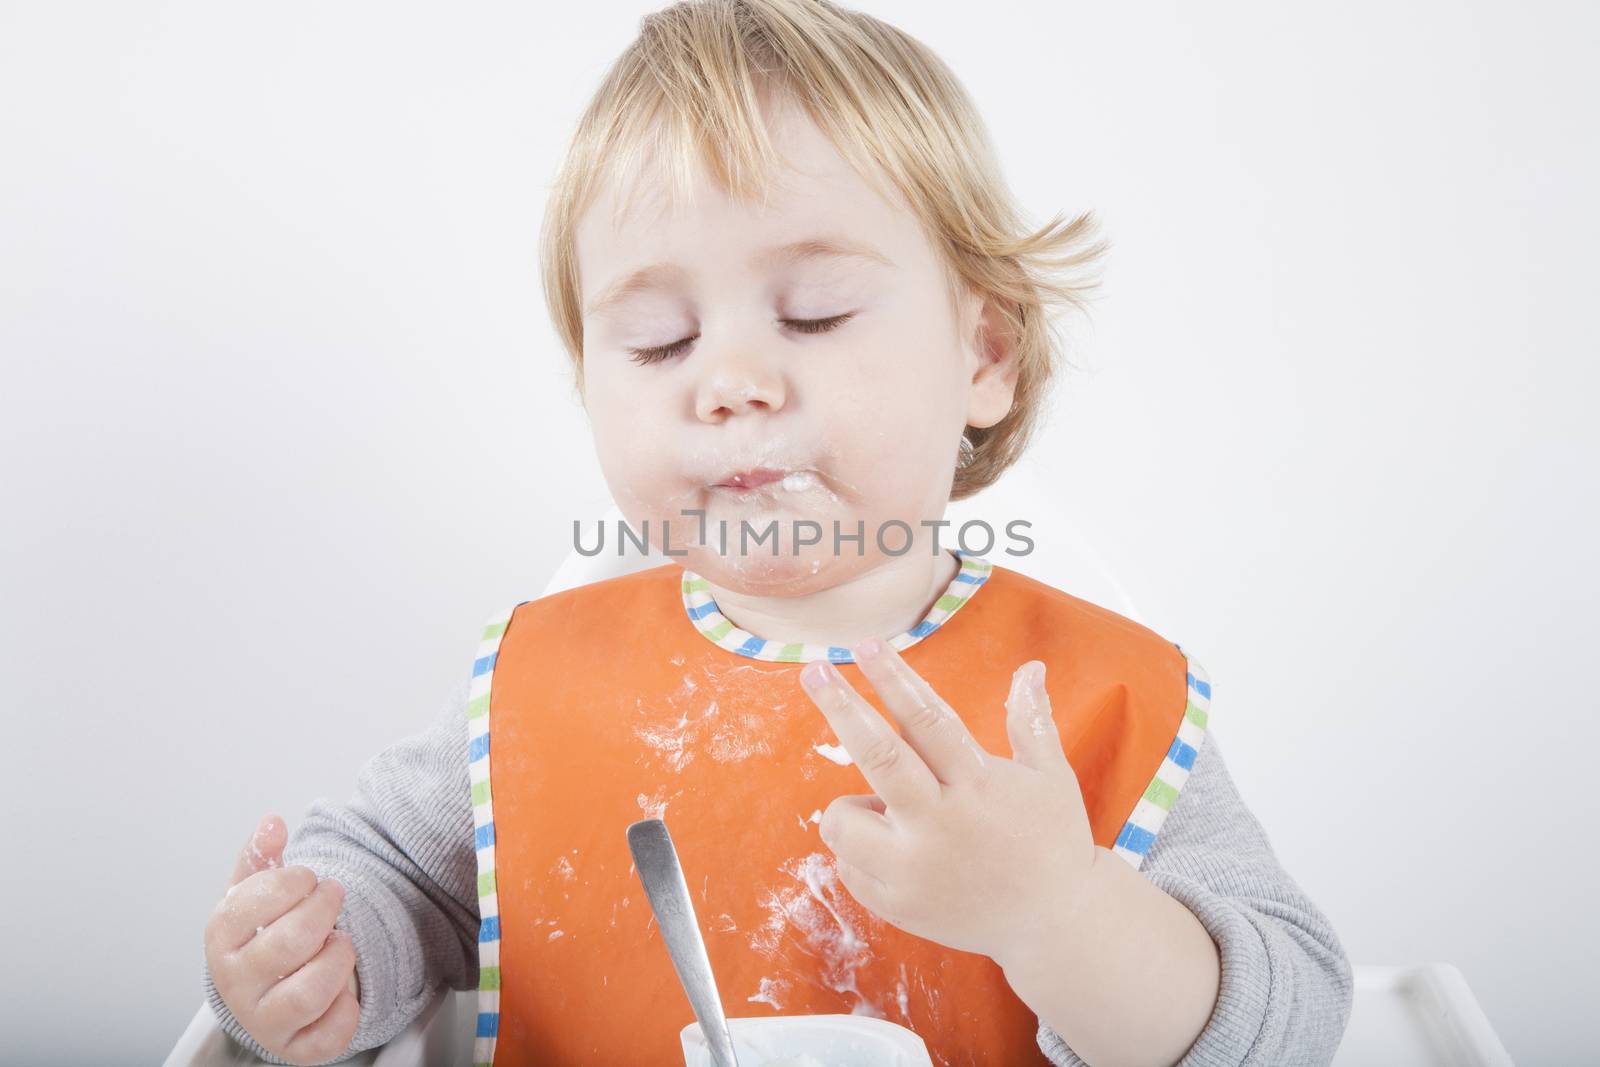 blonde caucasian baby seventeen month age orange bib grey sweater eating meal with her hand in white high chair